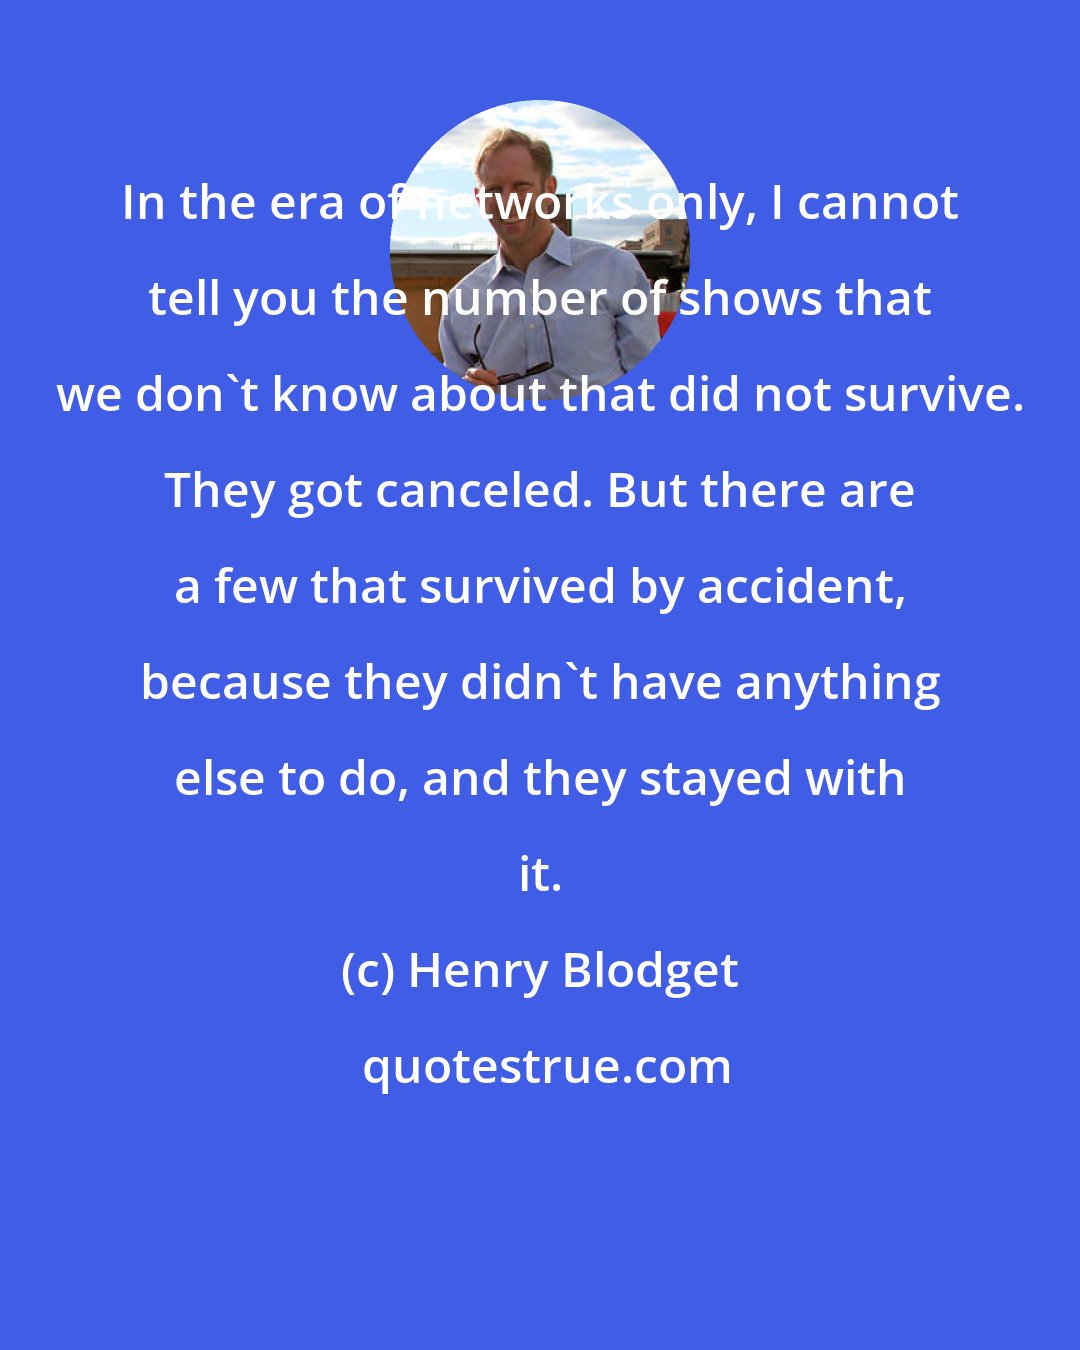 Henry Blodget: In the era of networks only, I cannot tell you the number of shows that we don't know about that did not survive. They got canceled. But there are a few that survived by accident, because they didn't have anything else to do, and they stayed with it.